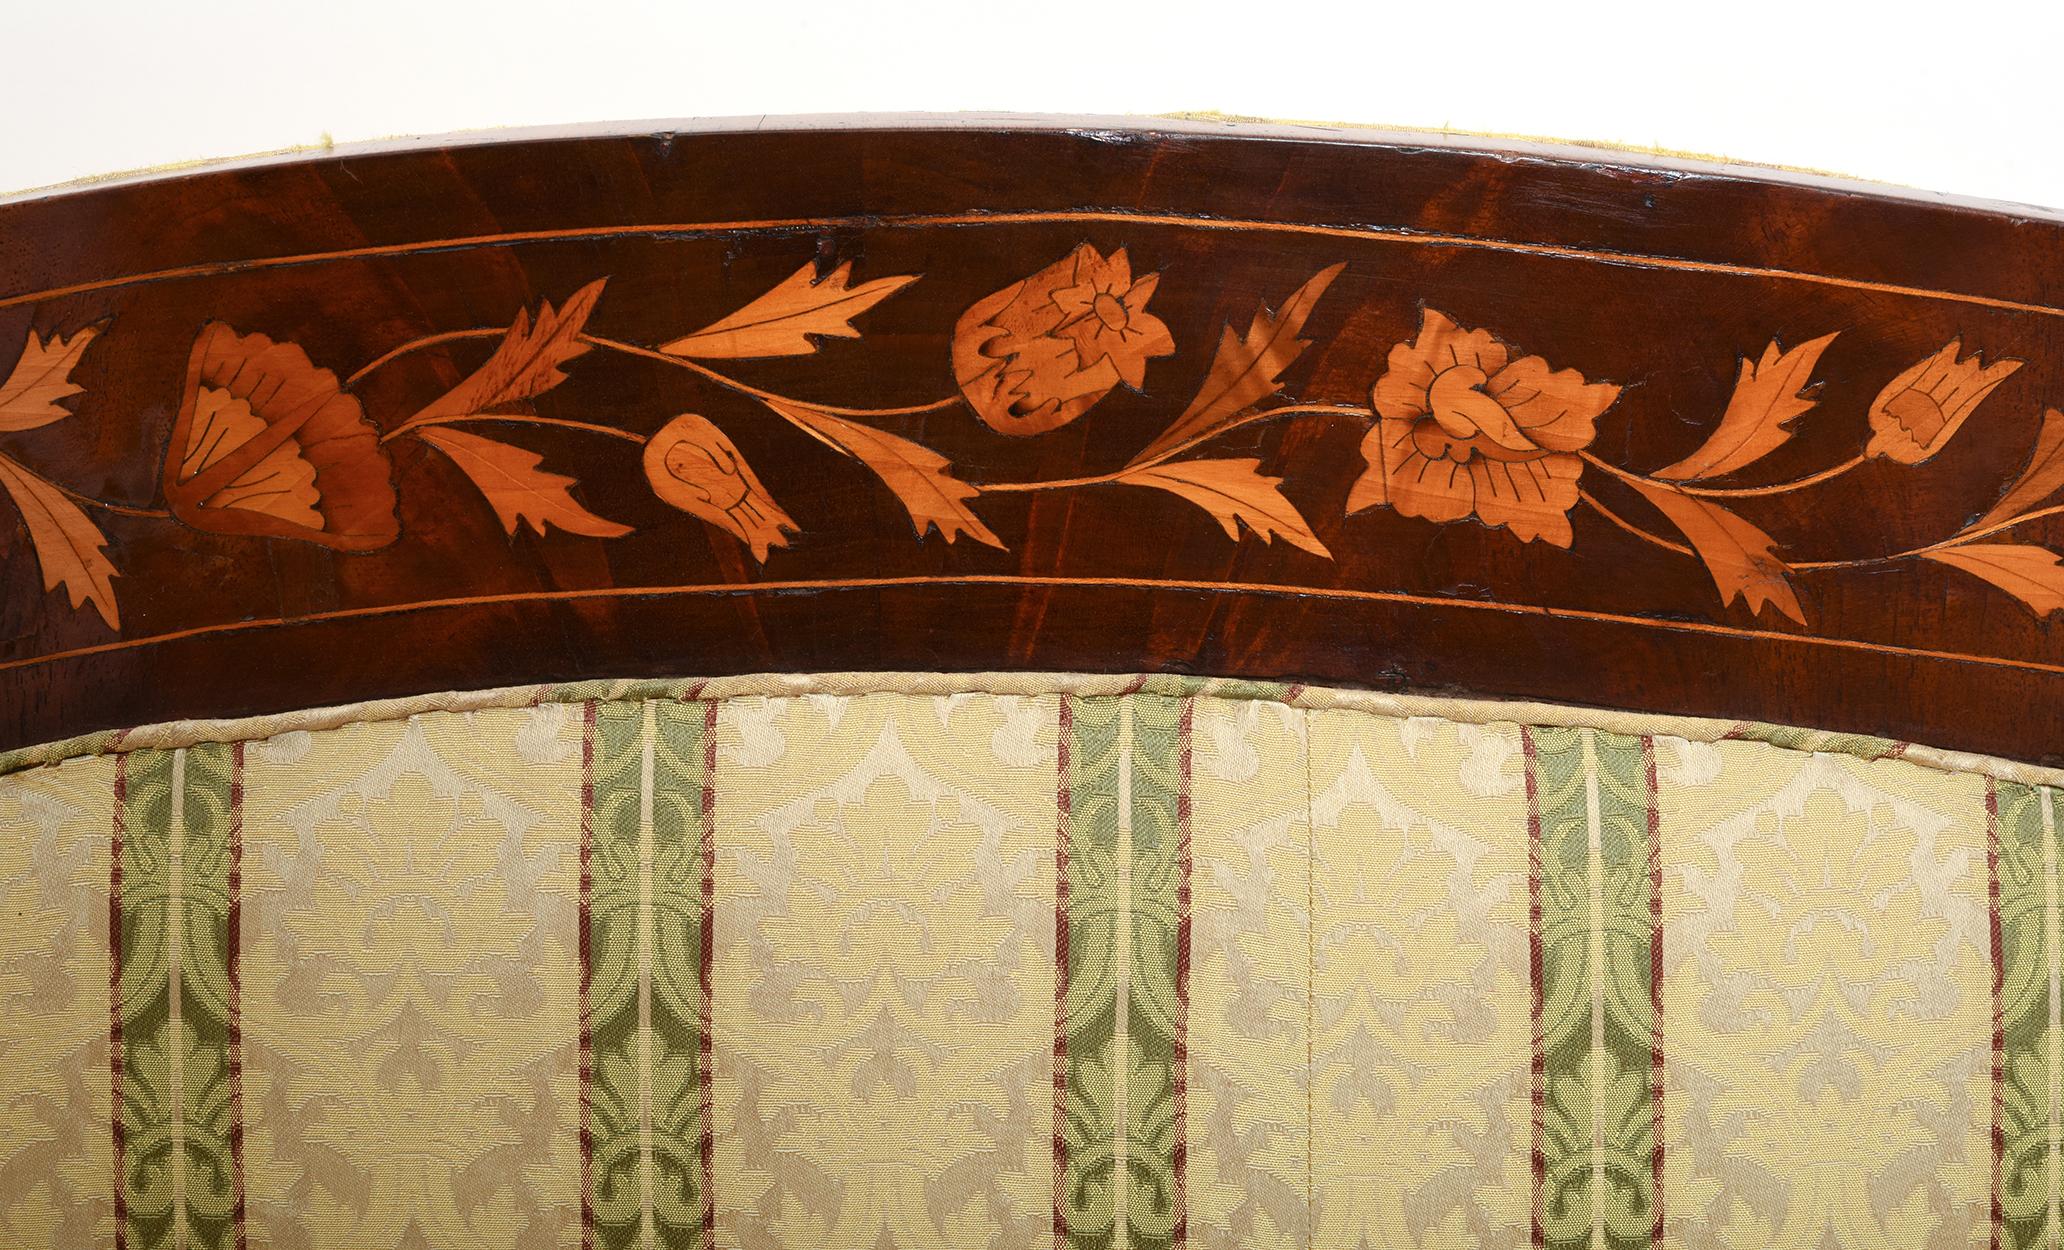 Dutch Early 19th Century Marquetry Wood Inlaid Sofa with Scrolled Back